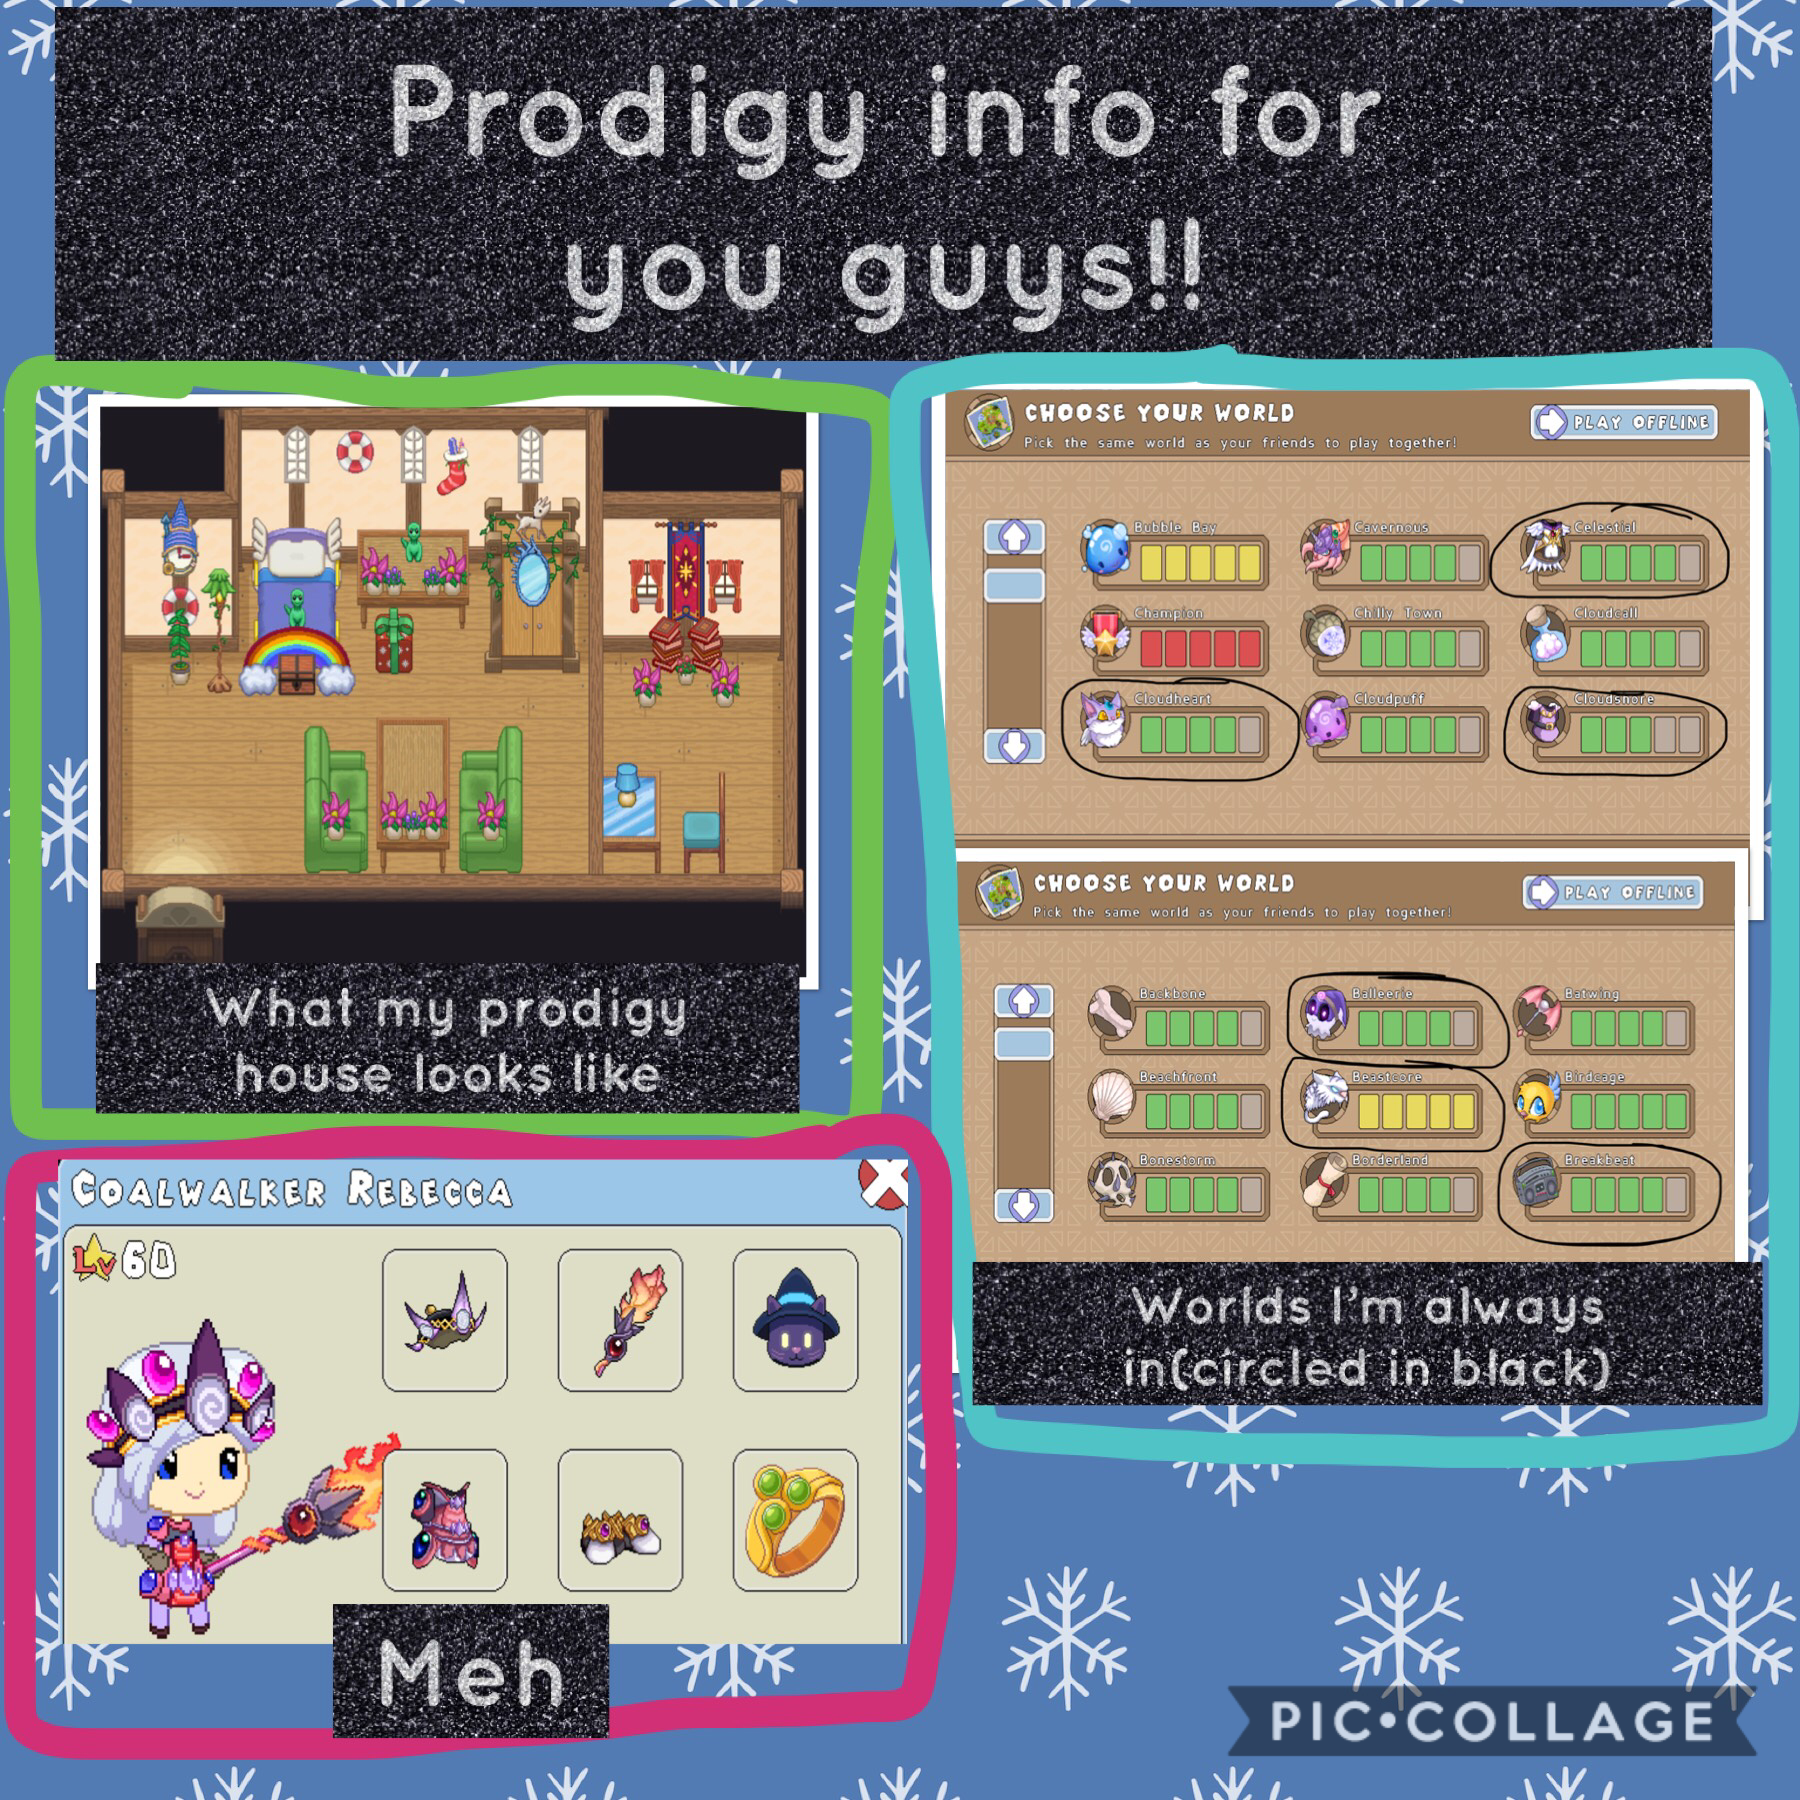 Prodigy info for you guys!!